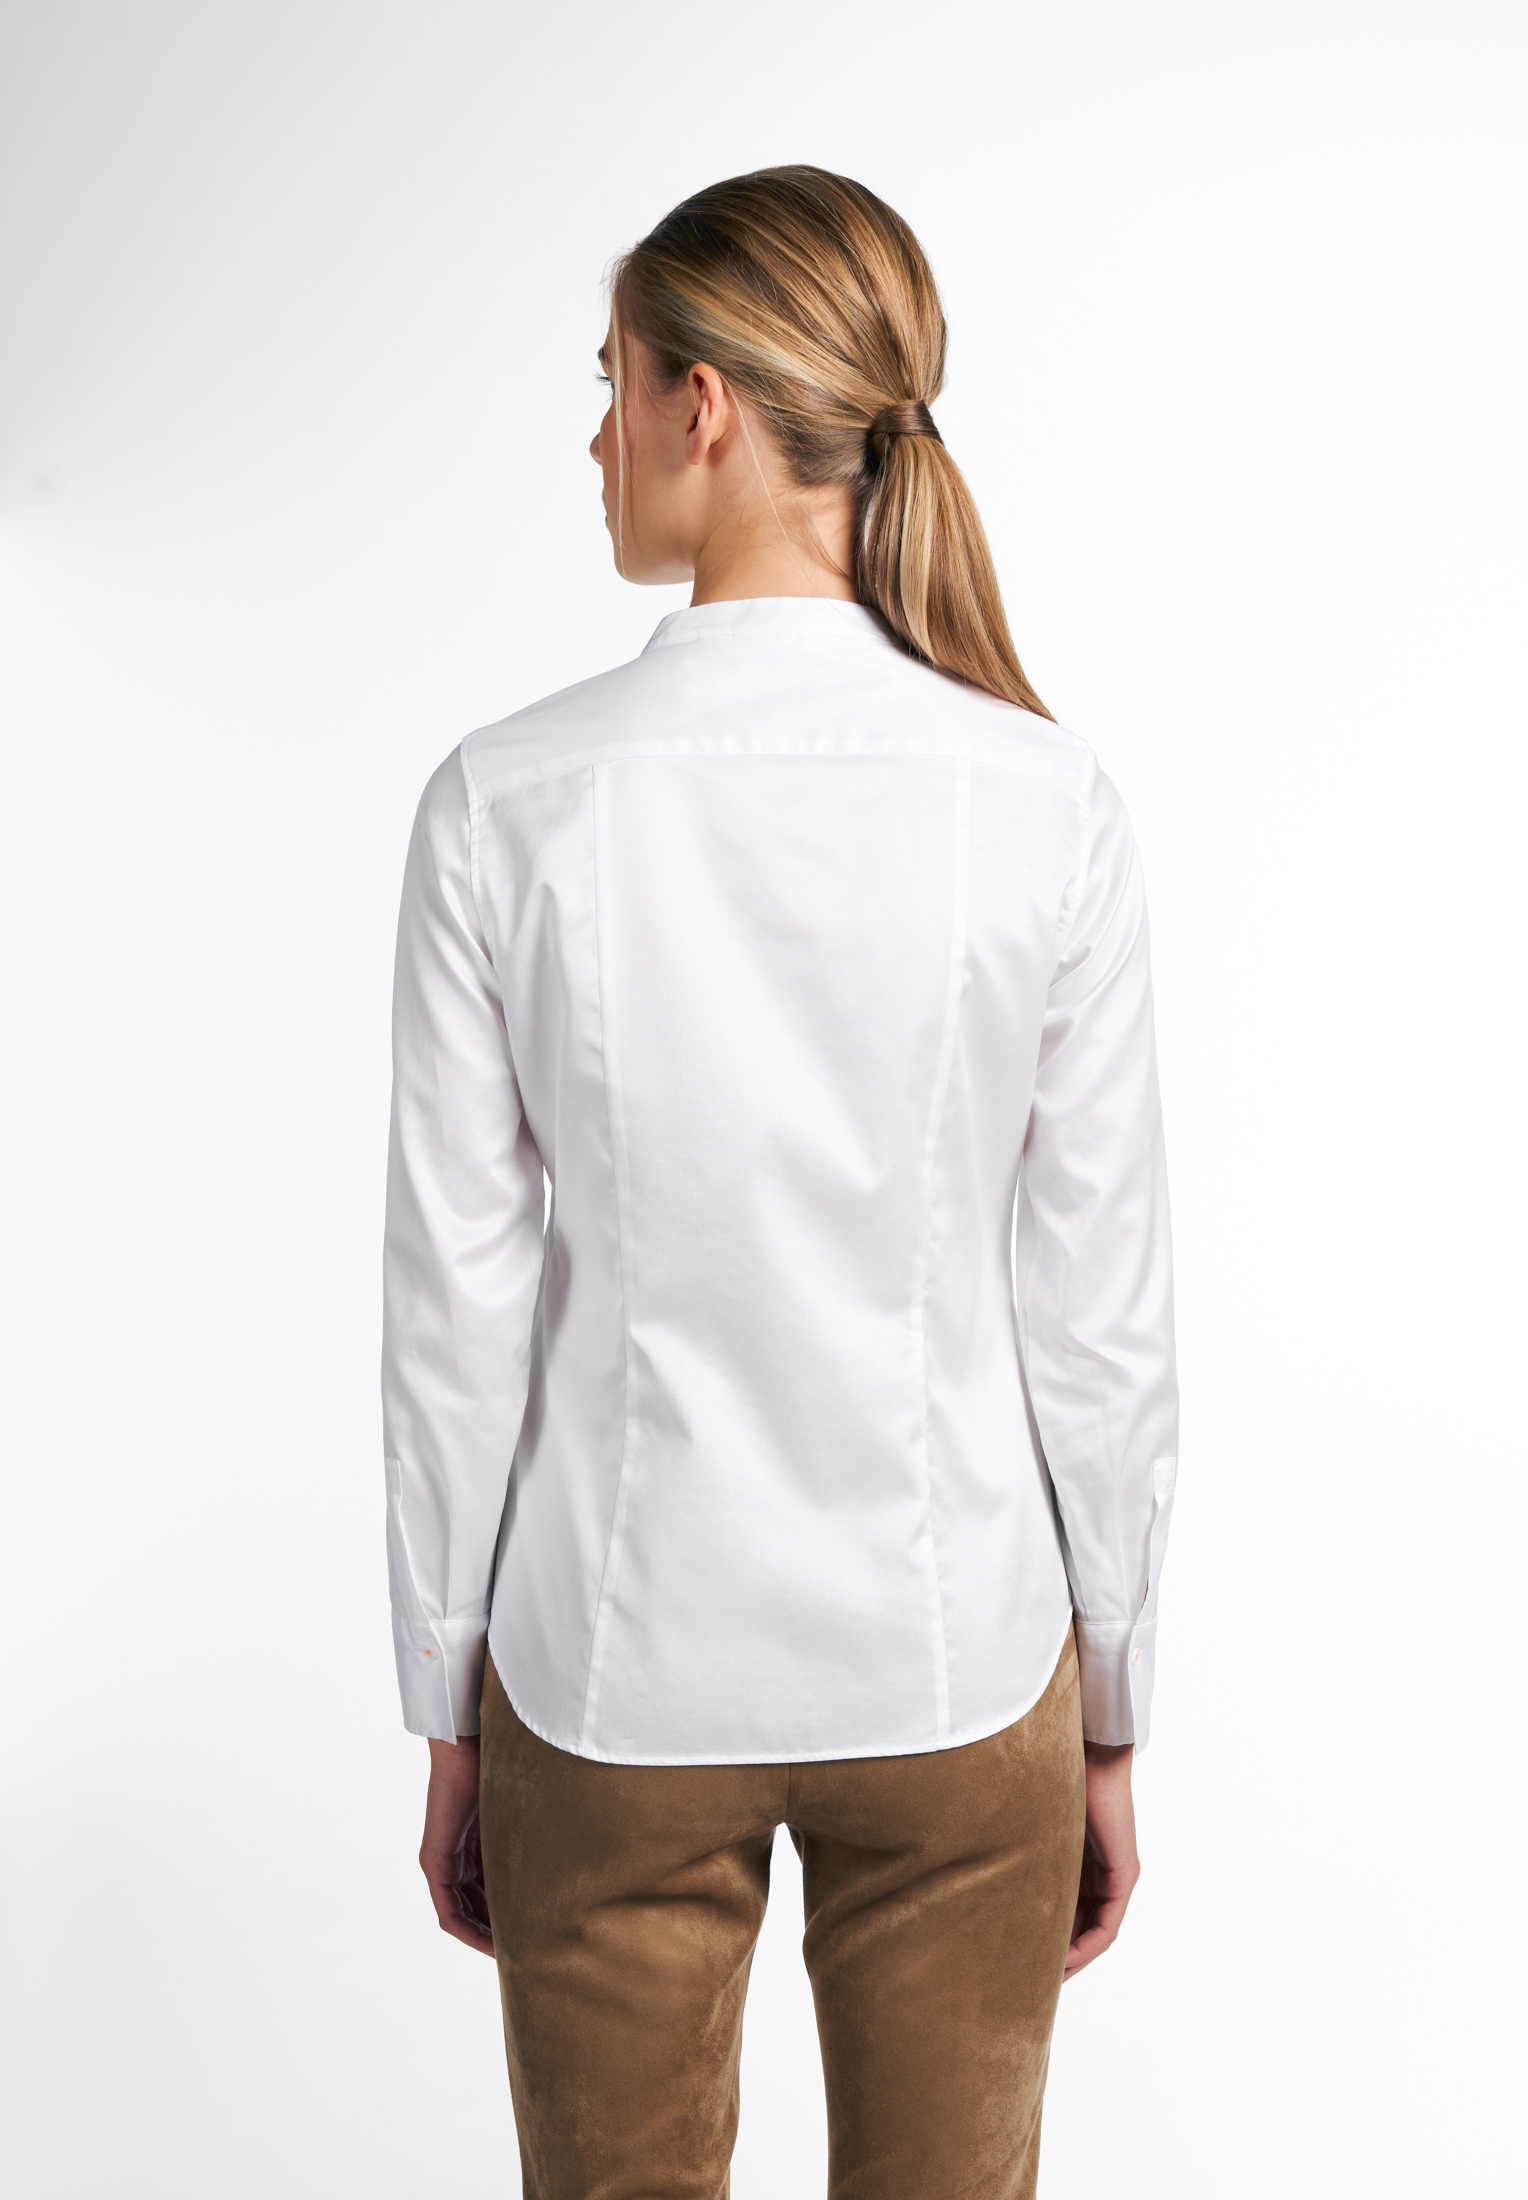 Soft Luxury Shirt off-white 2BL03742-00-02-38-1/1 Bluse | | | off-white Langarm | unifarben in 38